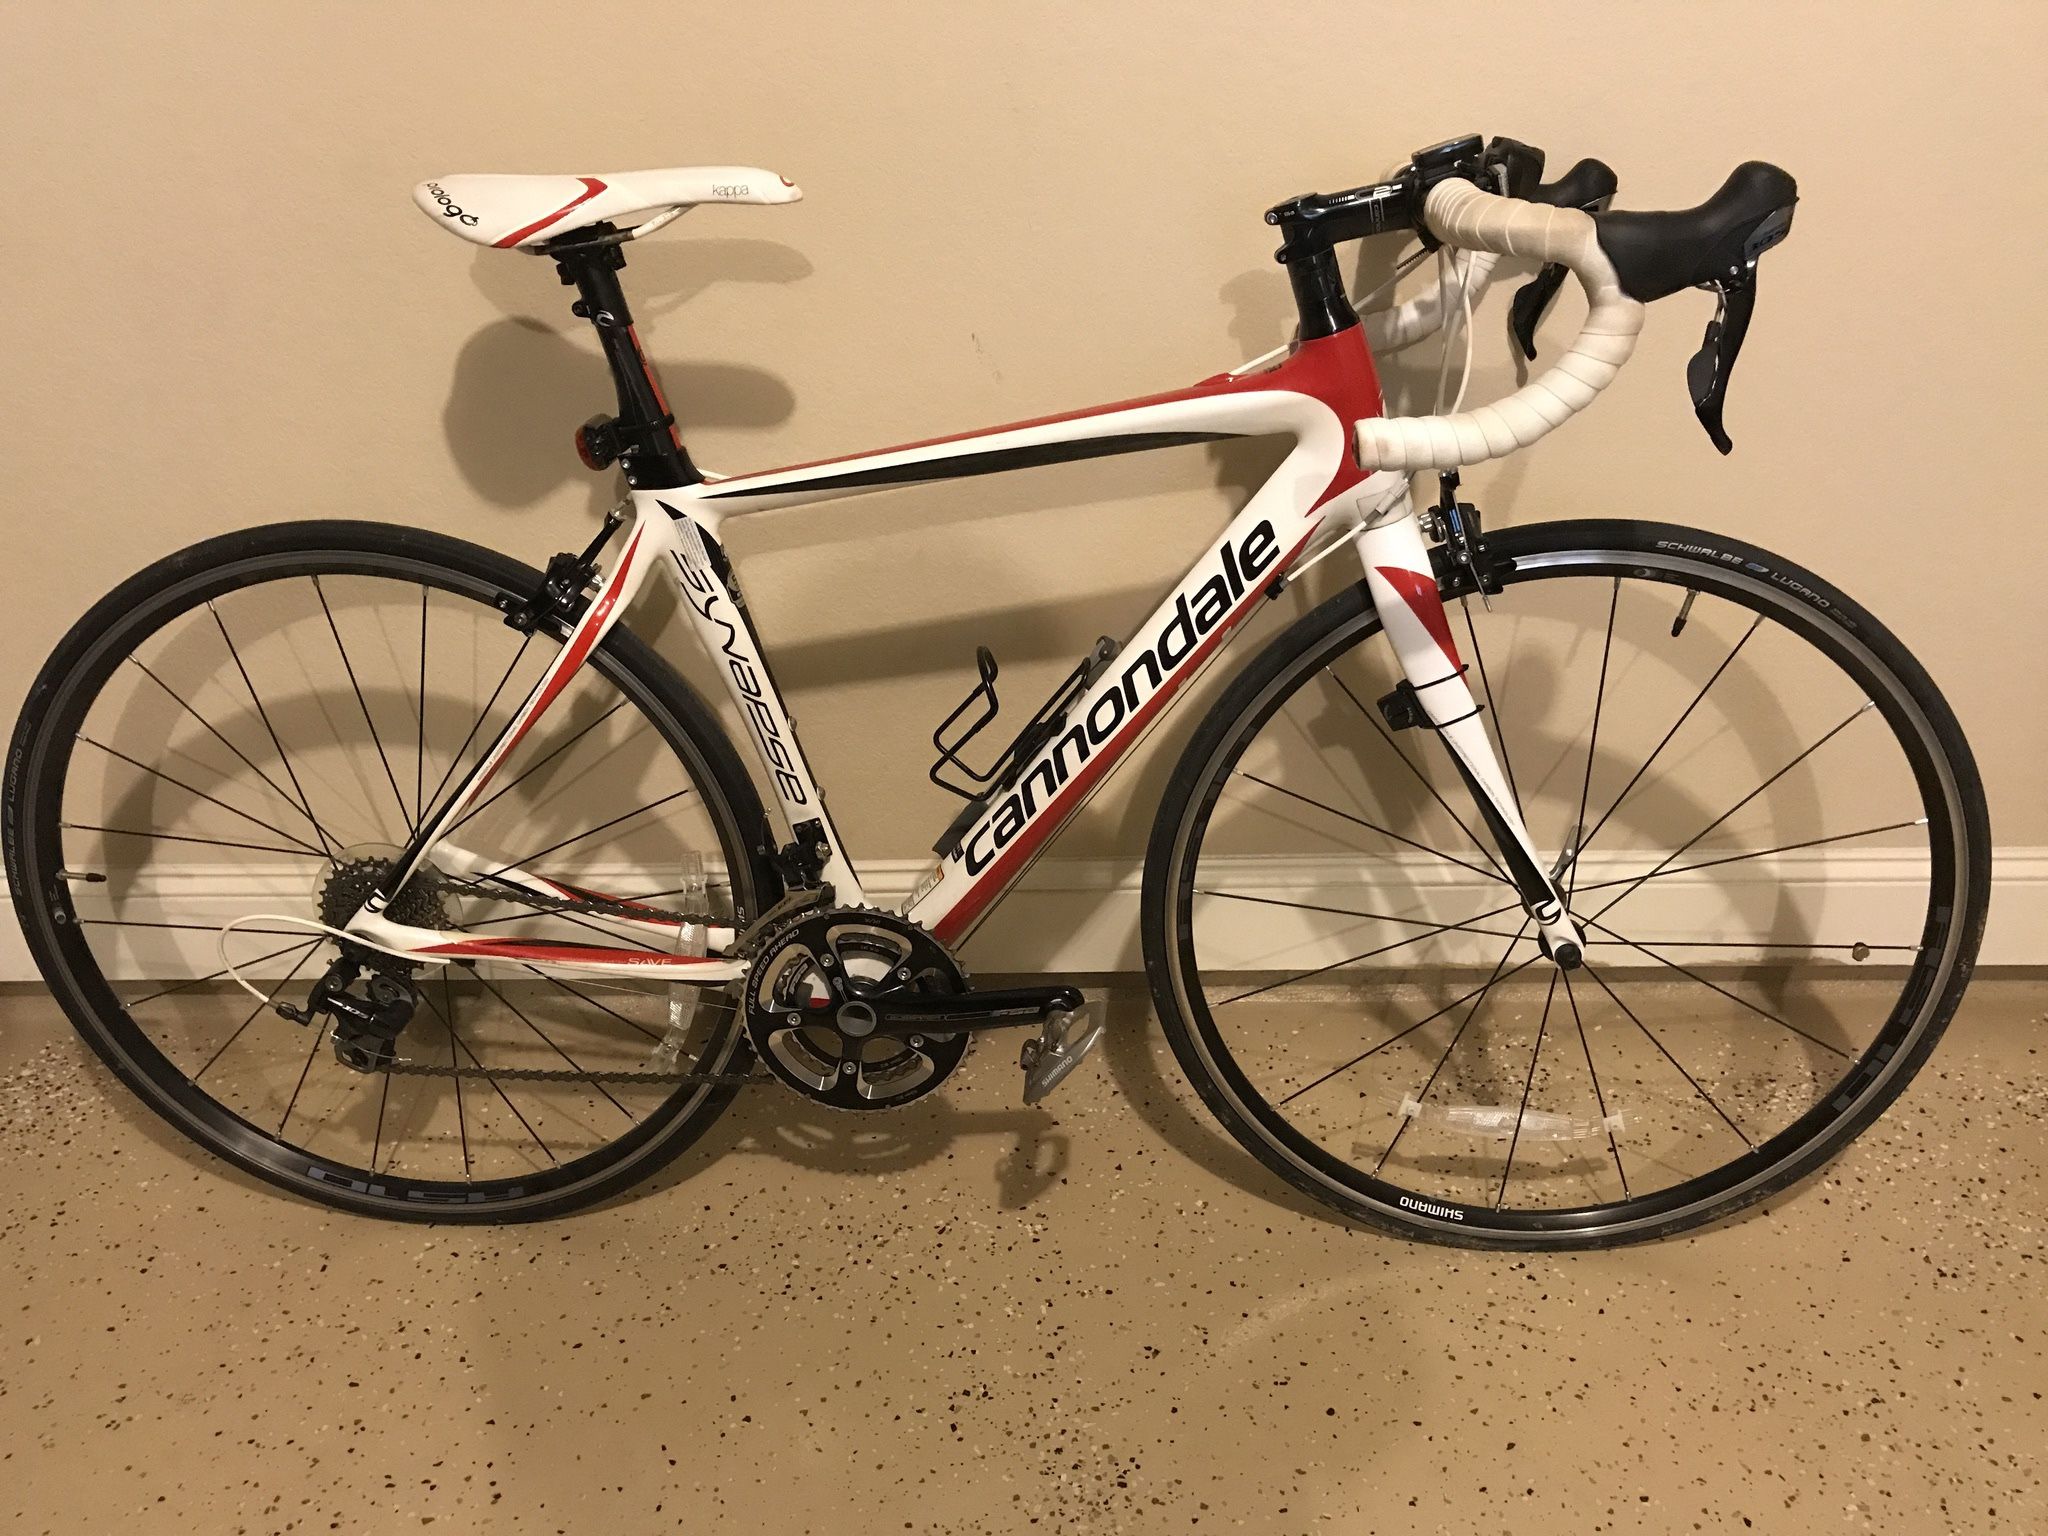 Cannondale Carbon Synapse 51cm Bike With Extras!